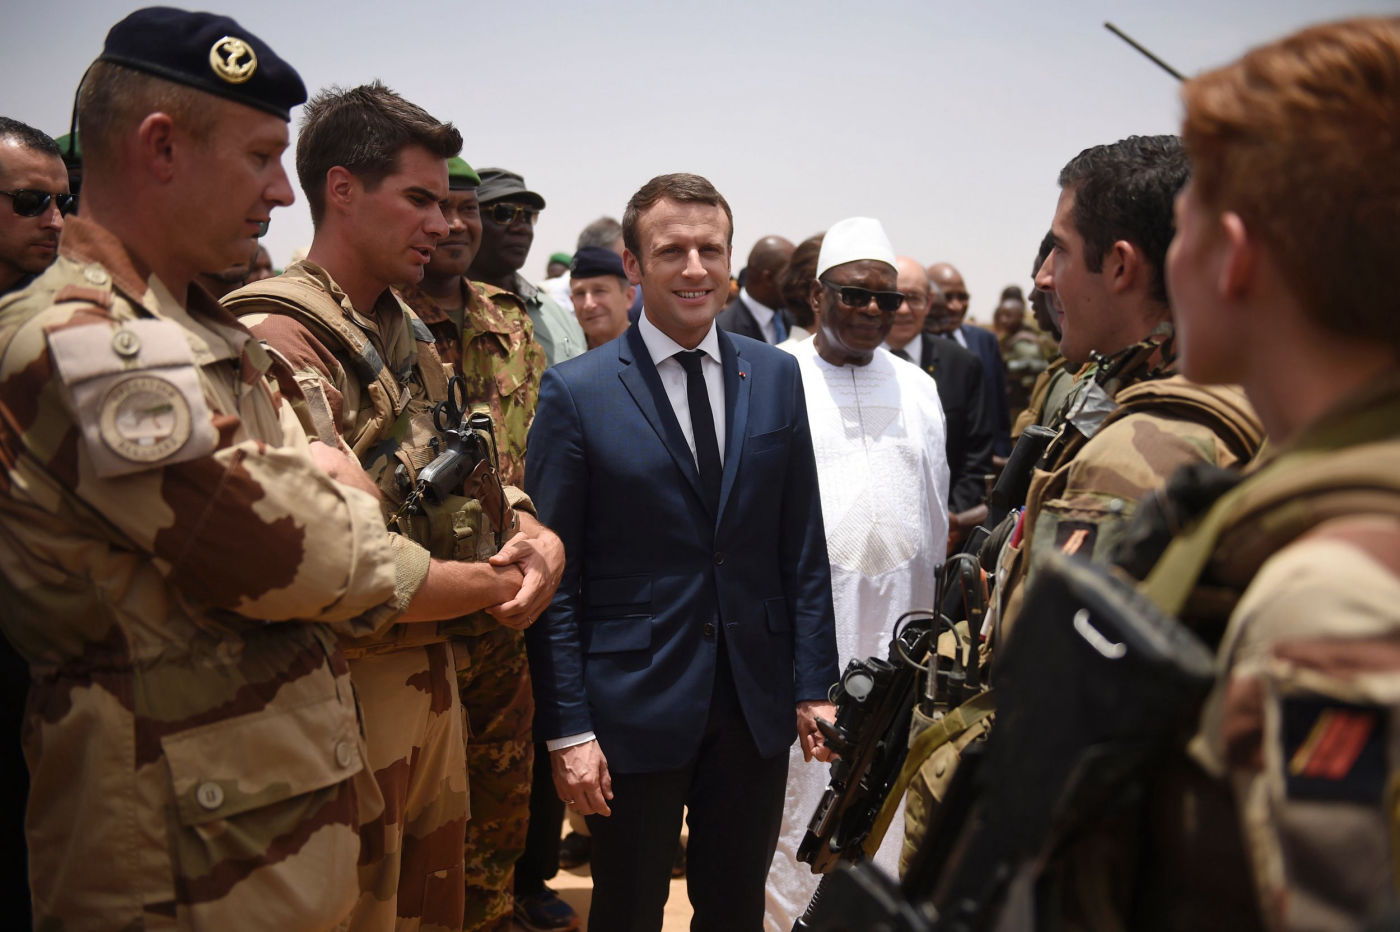 In its efforts to contain Muslim Extremism, France mobilized resources to critical countries for the Al-Qaida terror network, profiling itself as a prime target with an increased focus of the Al Qaeda network.